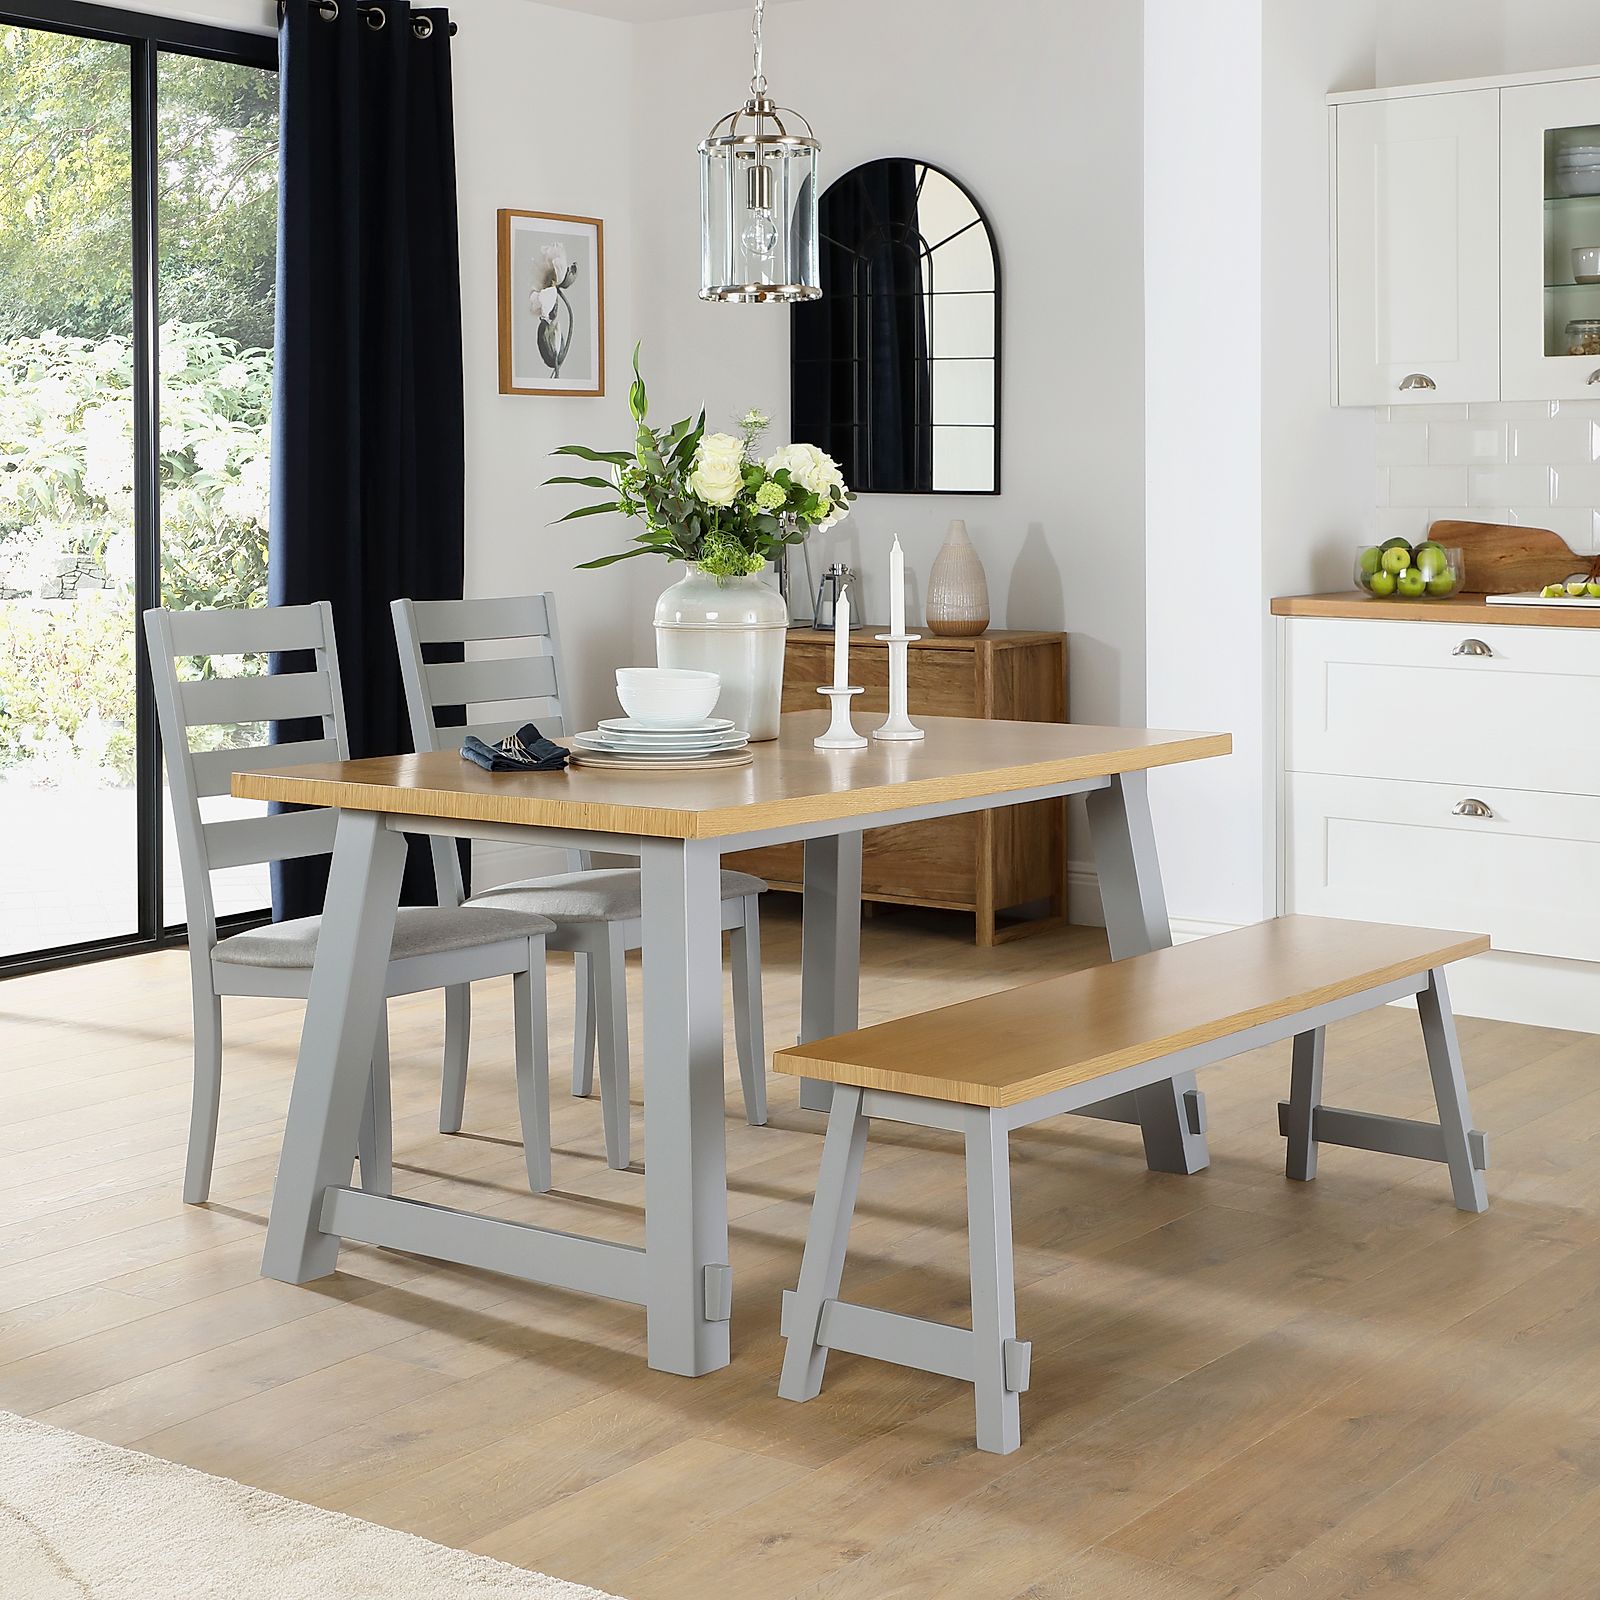 Croft Painted Grey and Oak Dining Table and Bench with 2 Grove Chairs